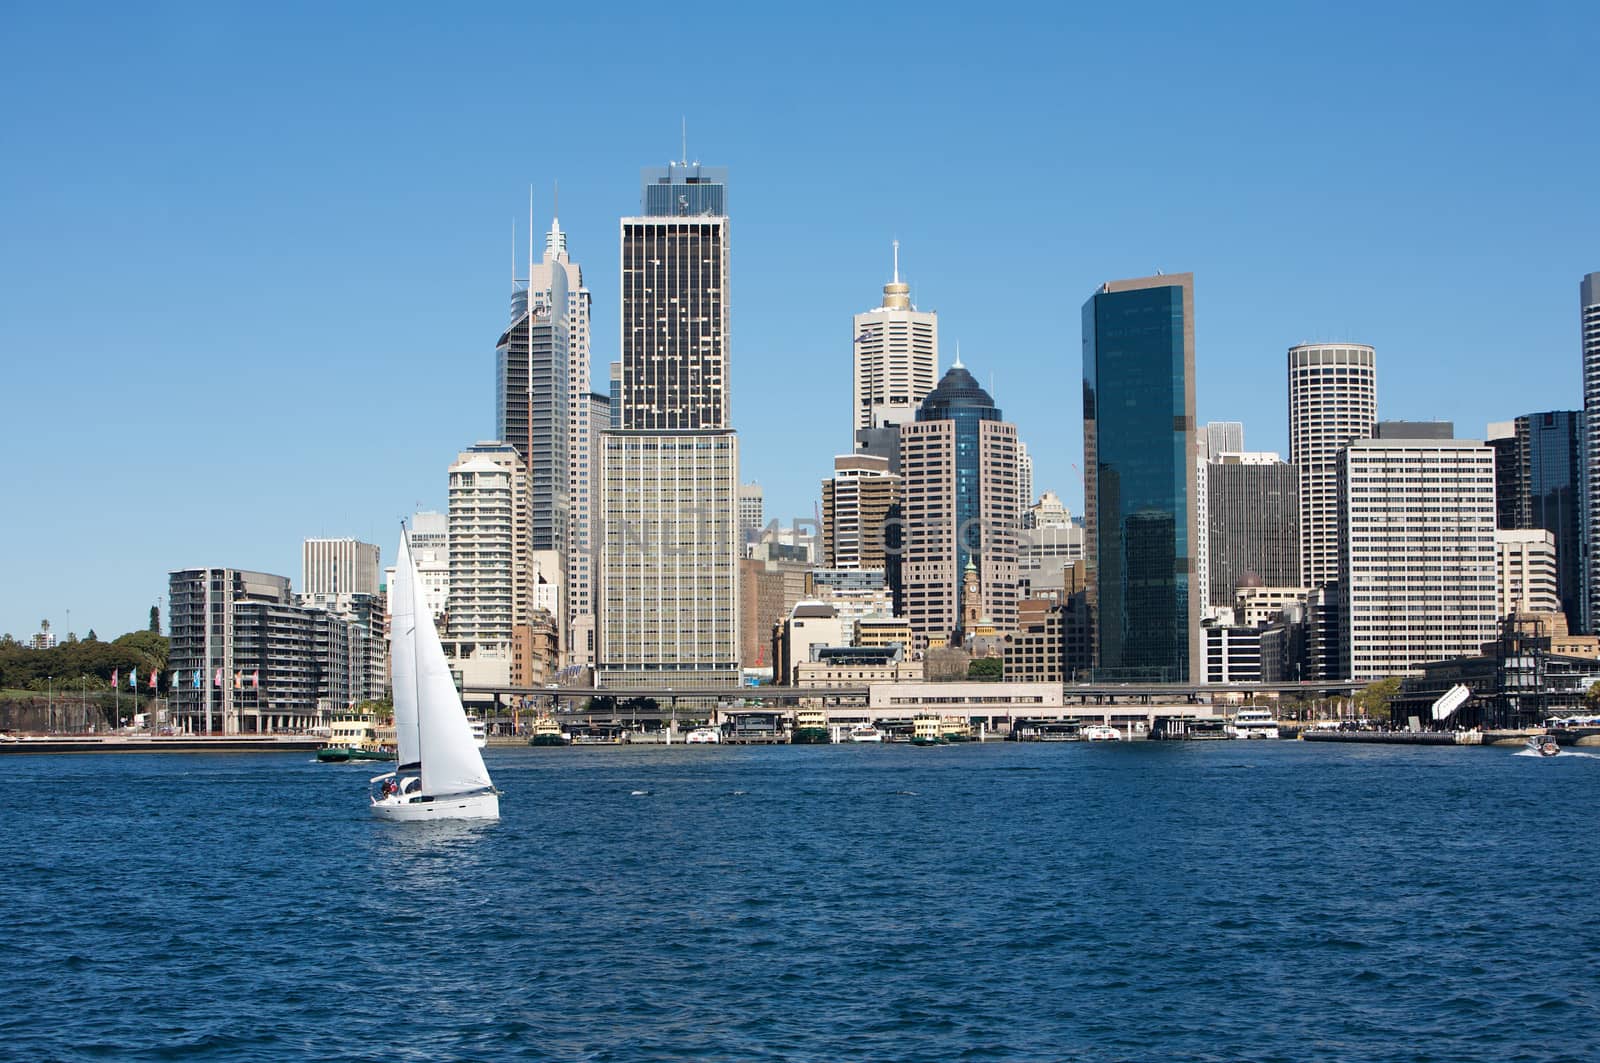 Sydney view with City skyline in the background and boat in the water, Australia